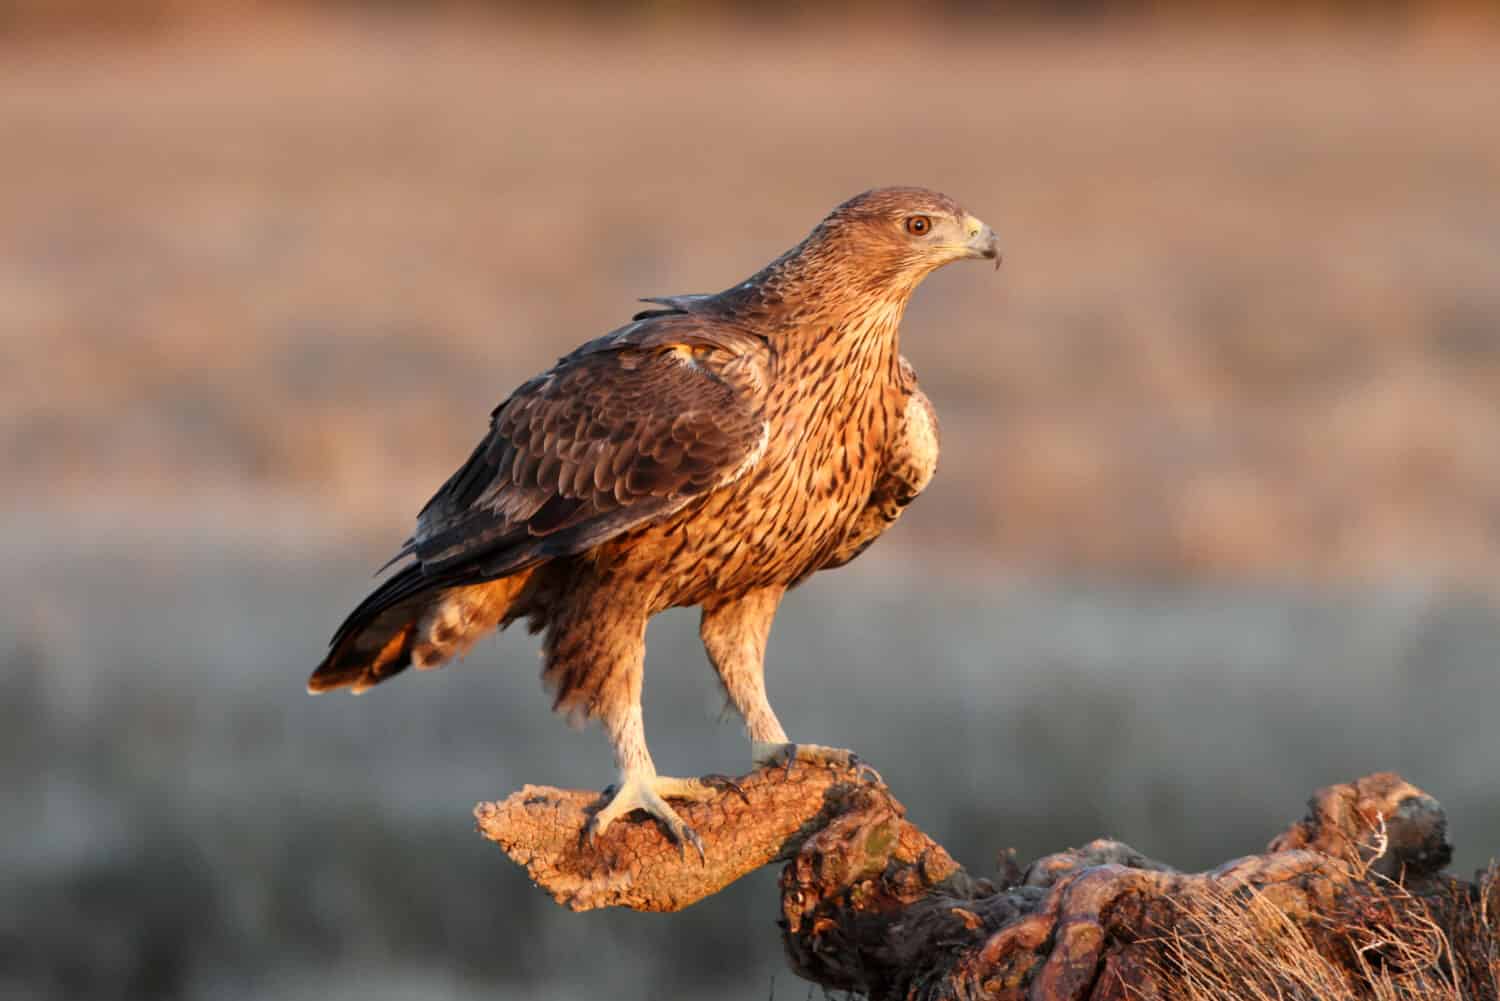 Two years old female of Bonelli´s Eagle, eagles, birds